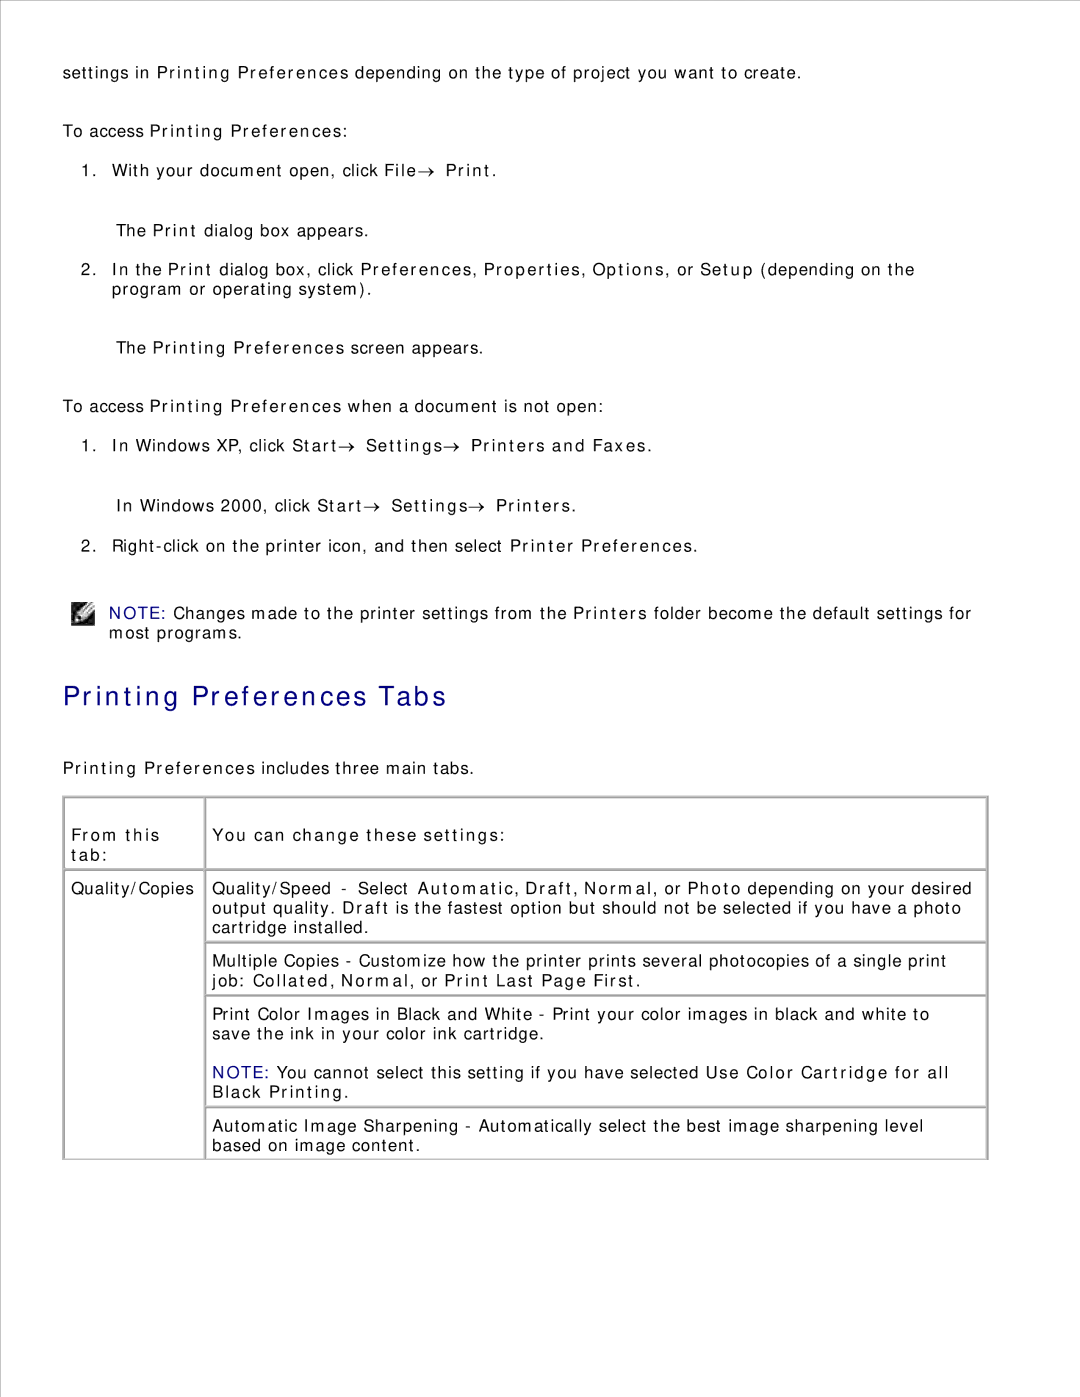 Dell 942 manual Printing Preferences Tabs, To access Printing Preferences, From this tab, You can change these settings 